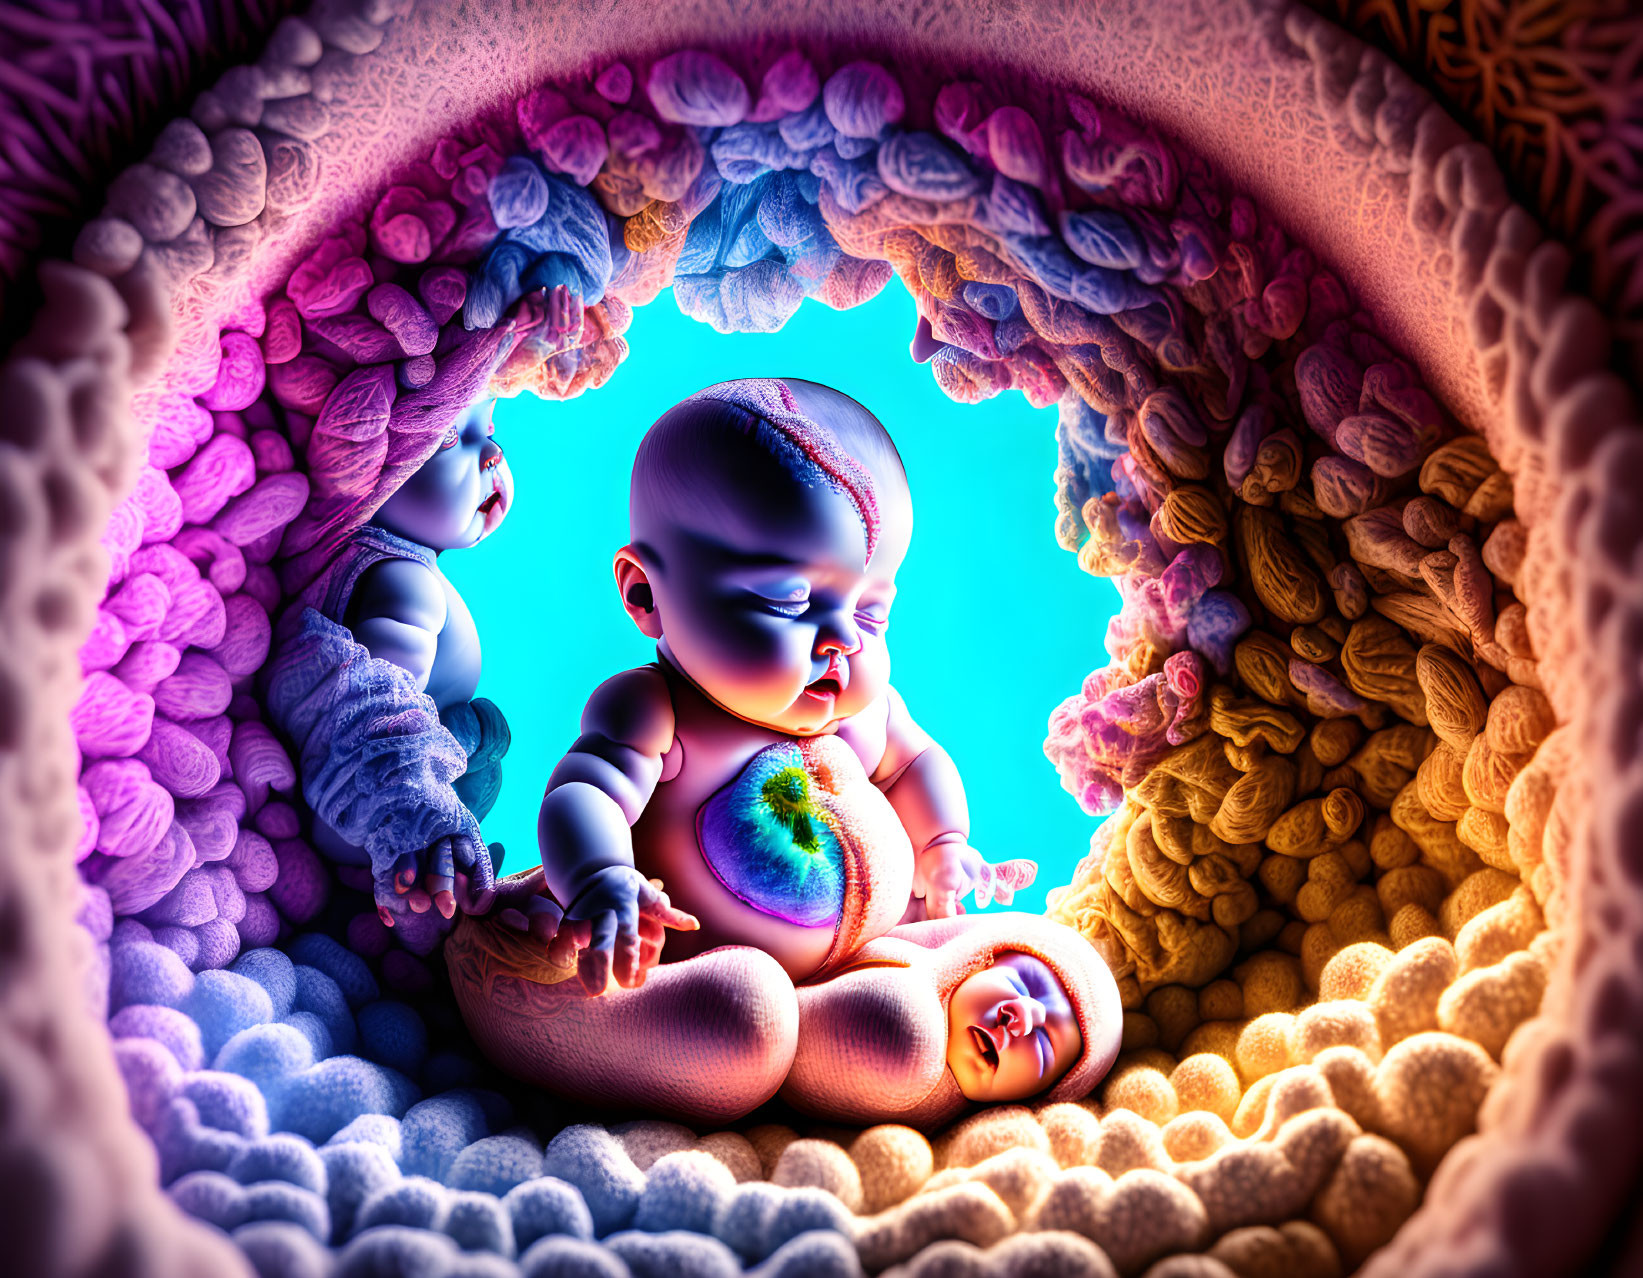 Colorful illustration of two babies in cloud frame with glowing heart